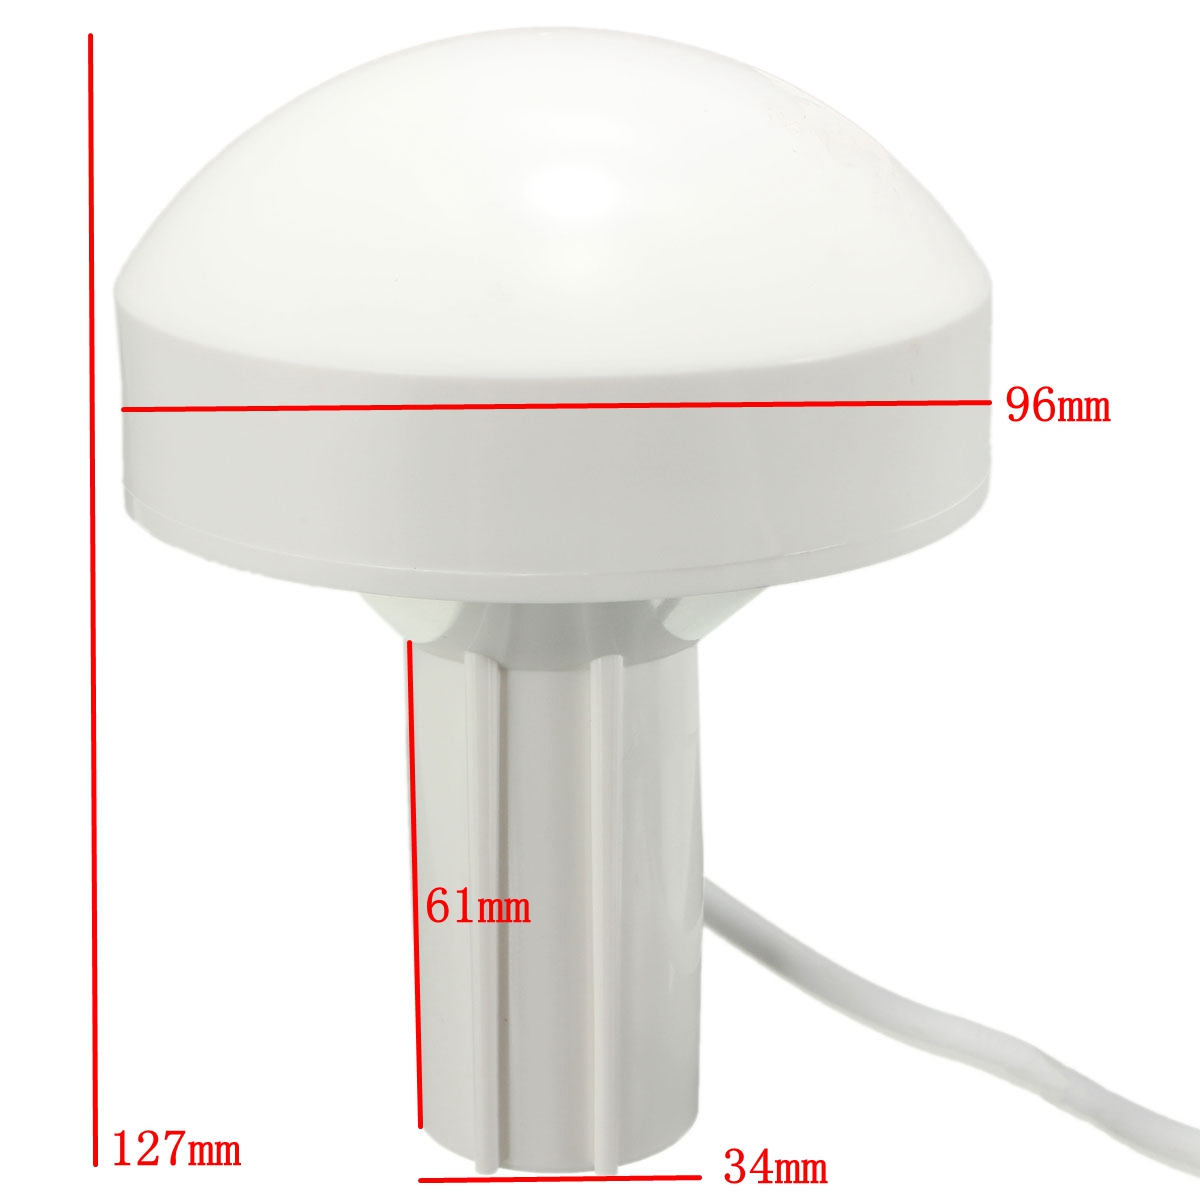 GPS-Active-Marine-Navigation-Antenna-10-Meters-With-BNC-Male-Plug-Connector-New-1019248